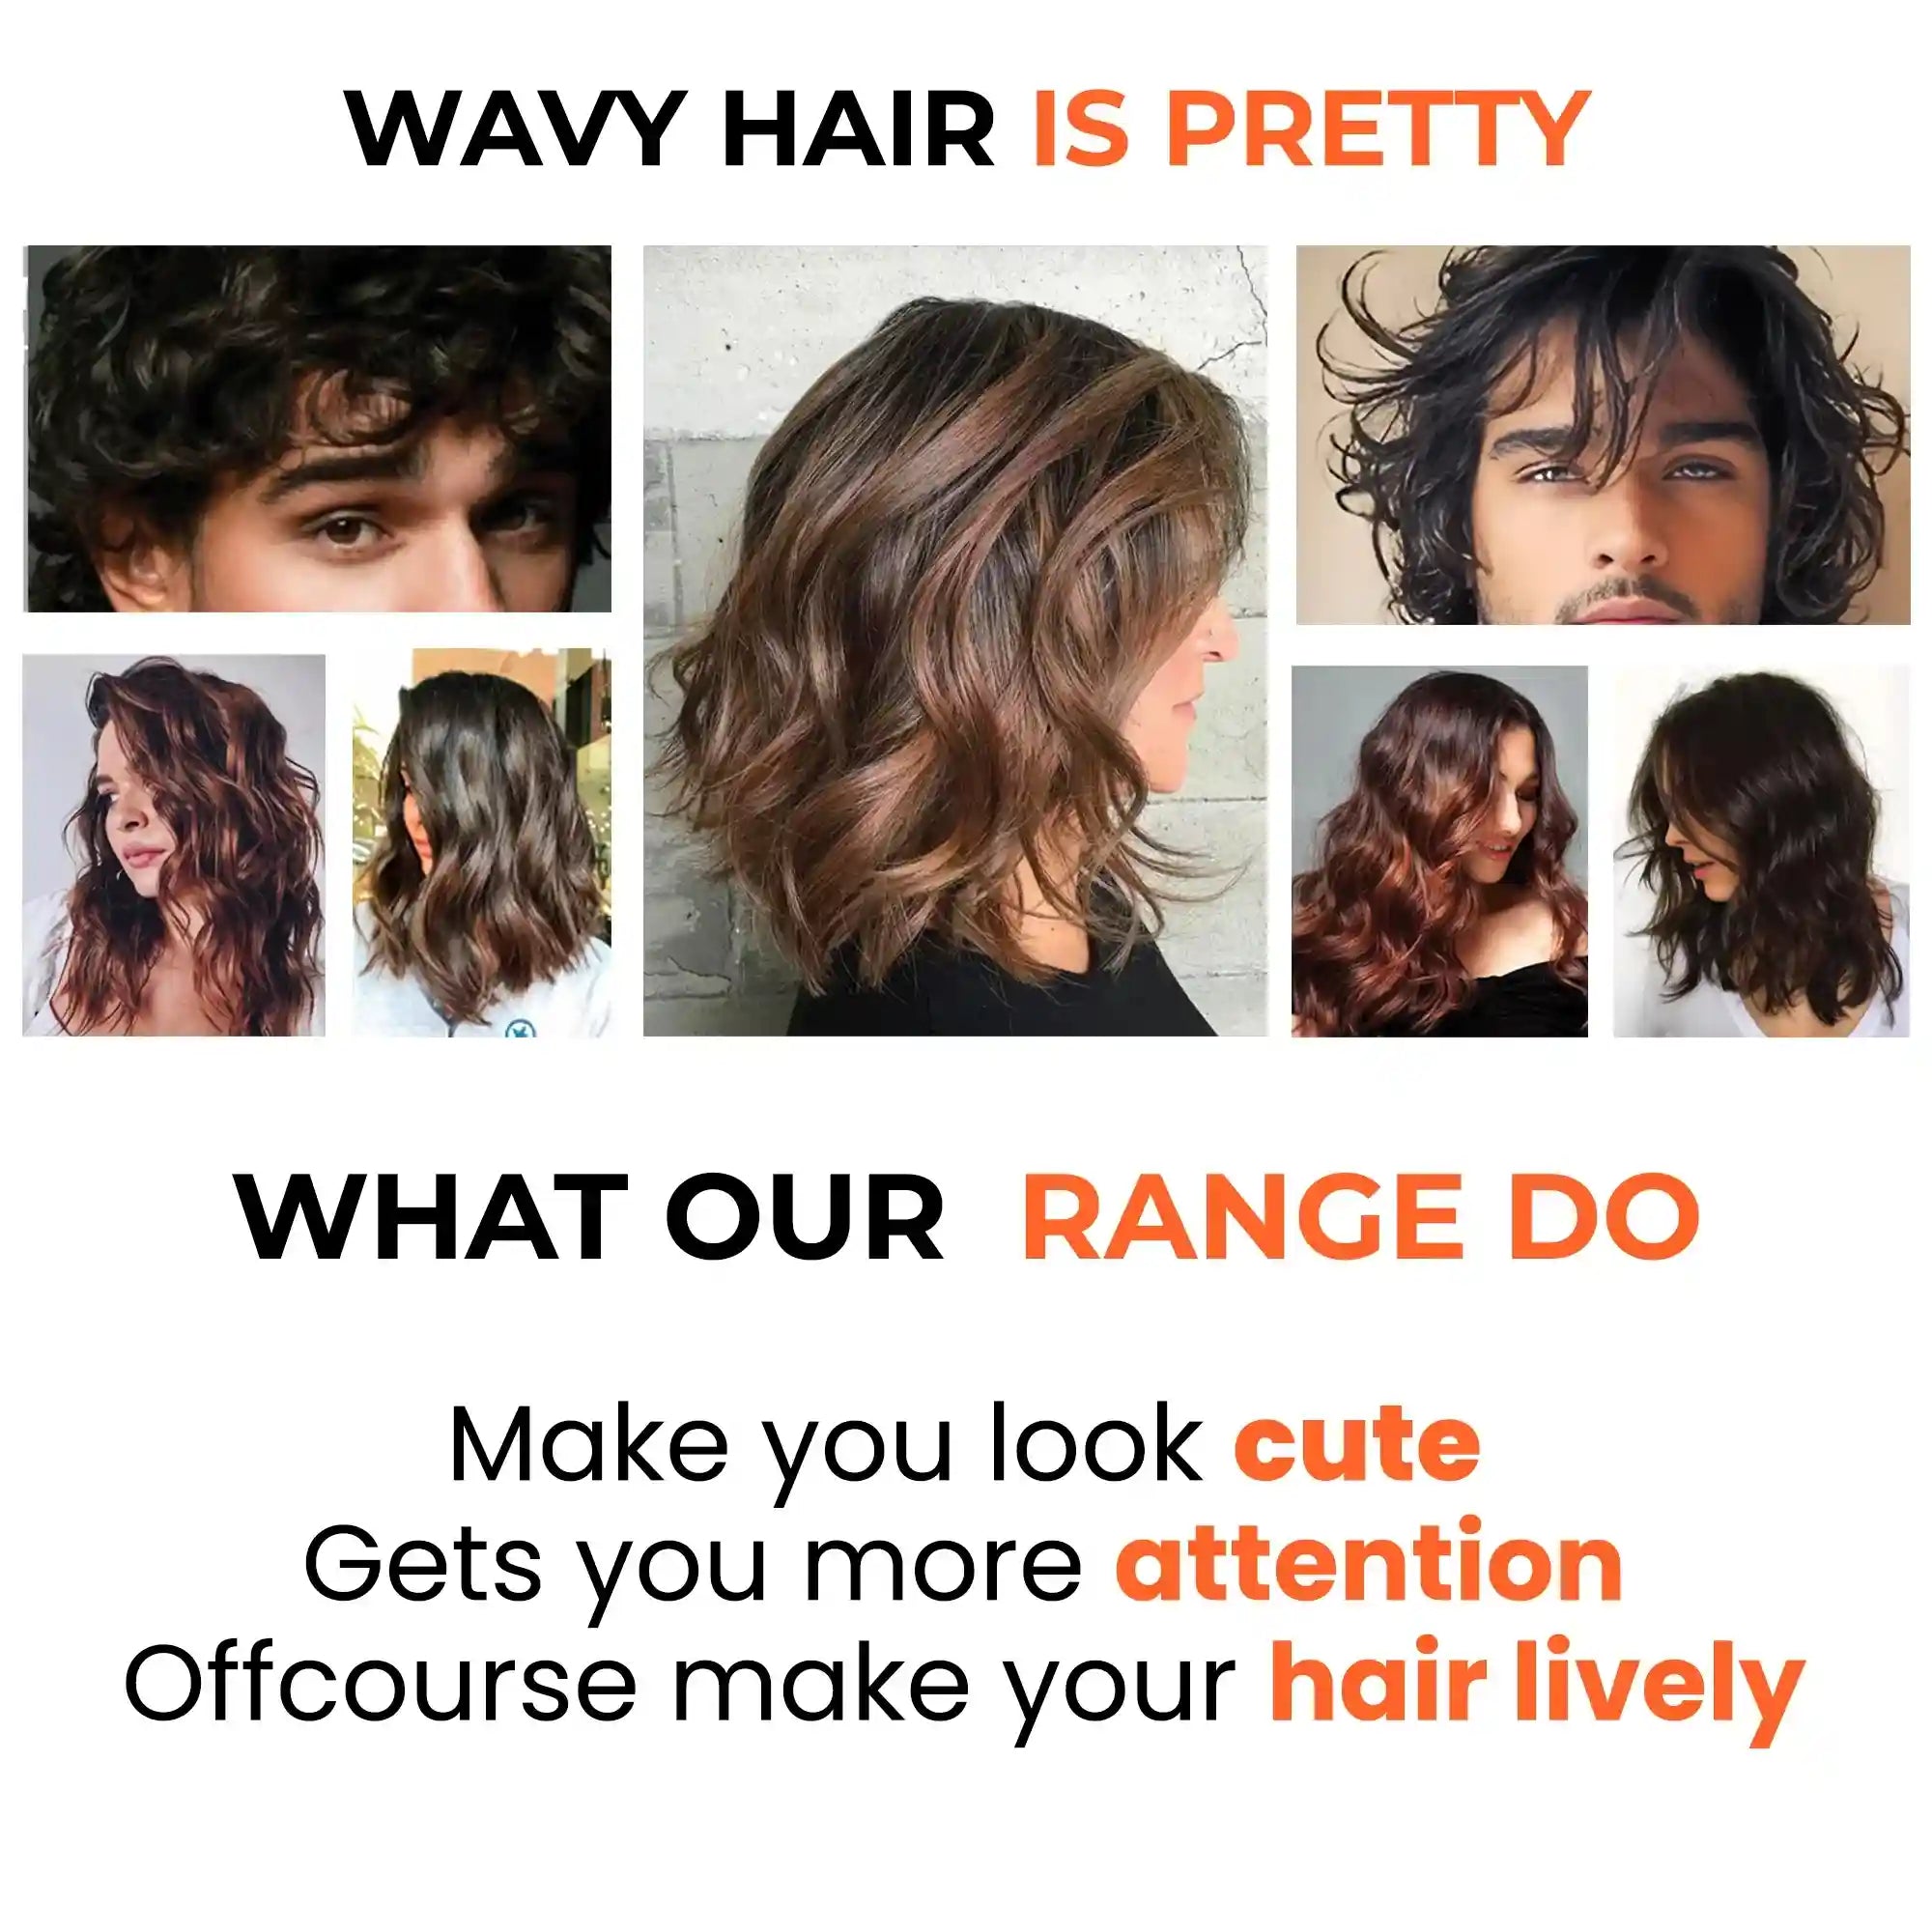 take care of your pretty wavy hair with our wavy hair conditioner